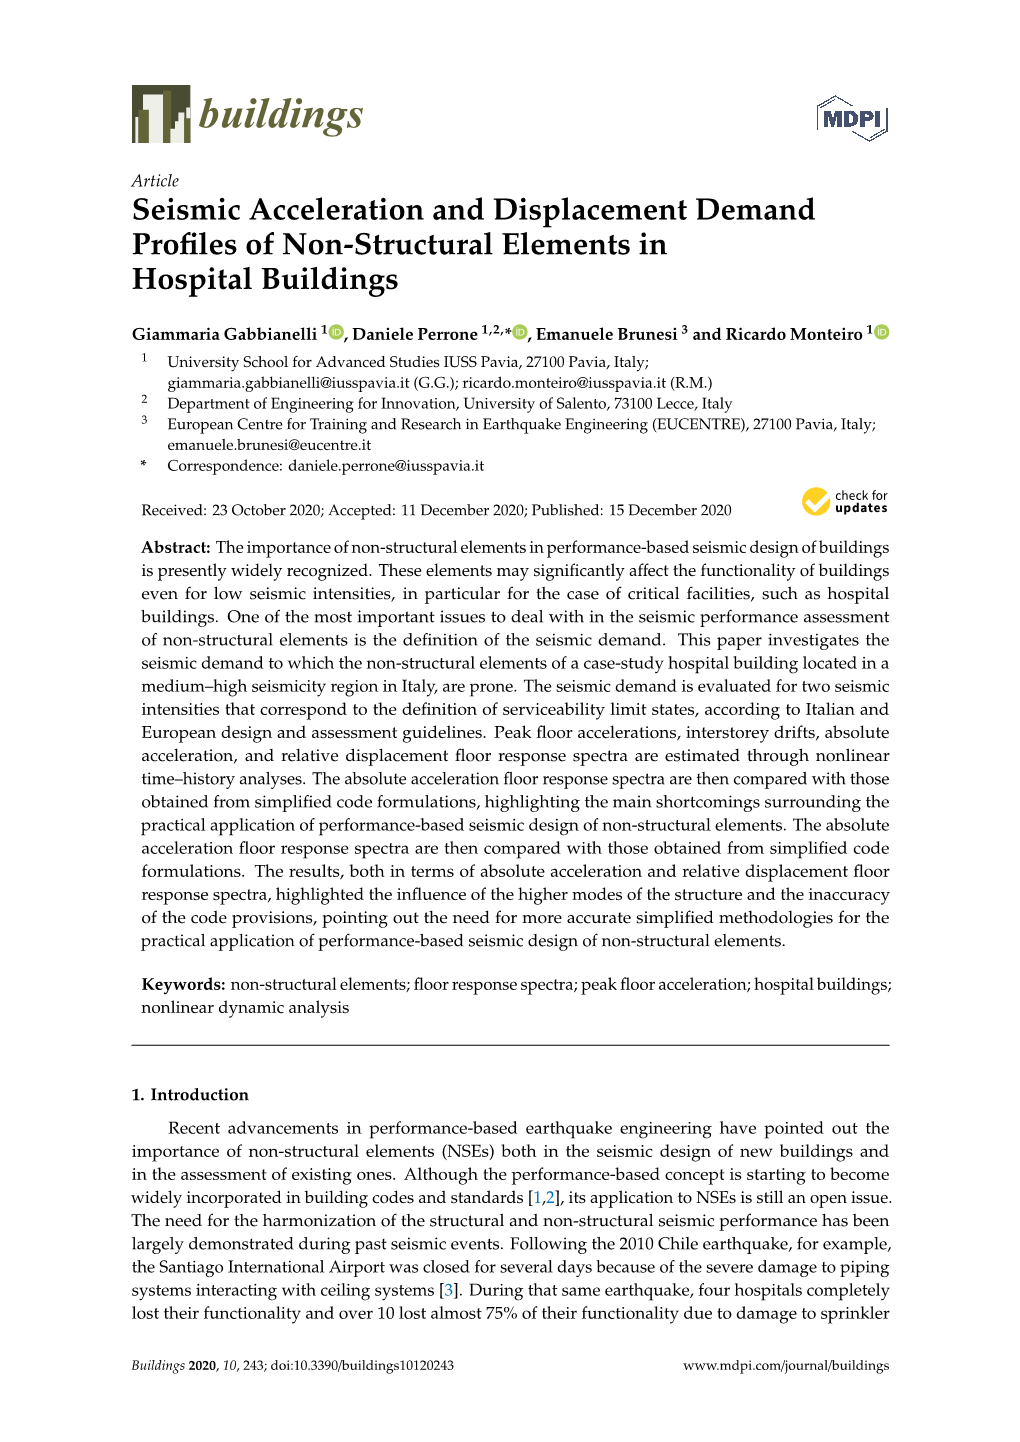 Seismic Acceleration and Displacement Demand Profiles of Non-Structural Elements in Hospital Buildings